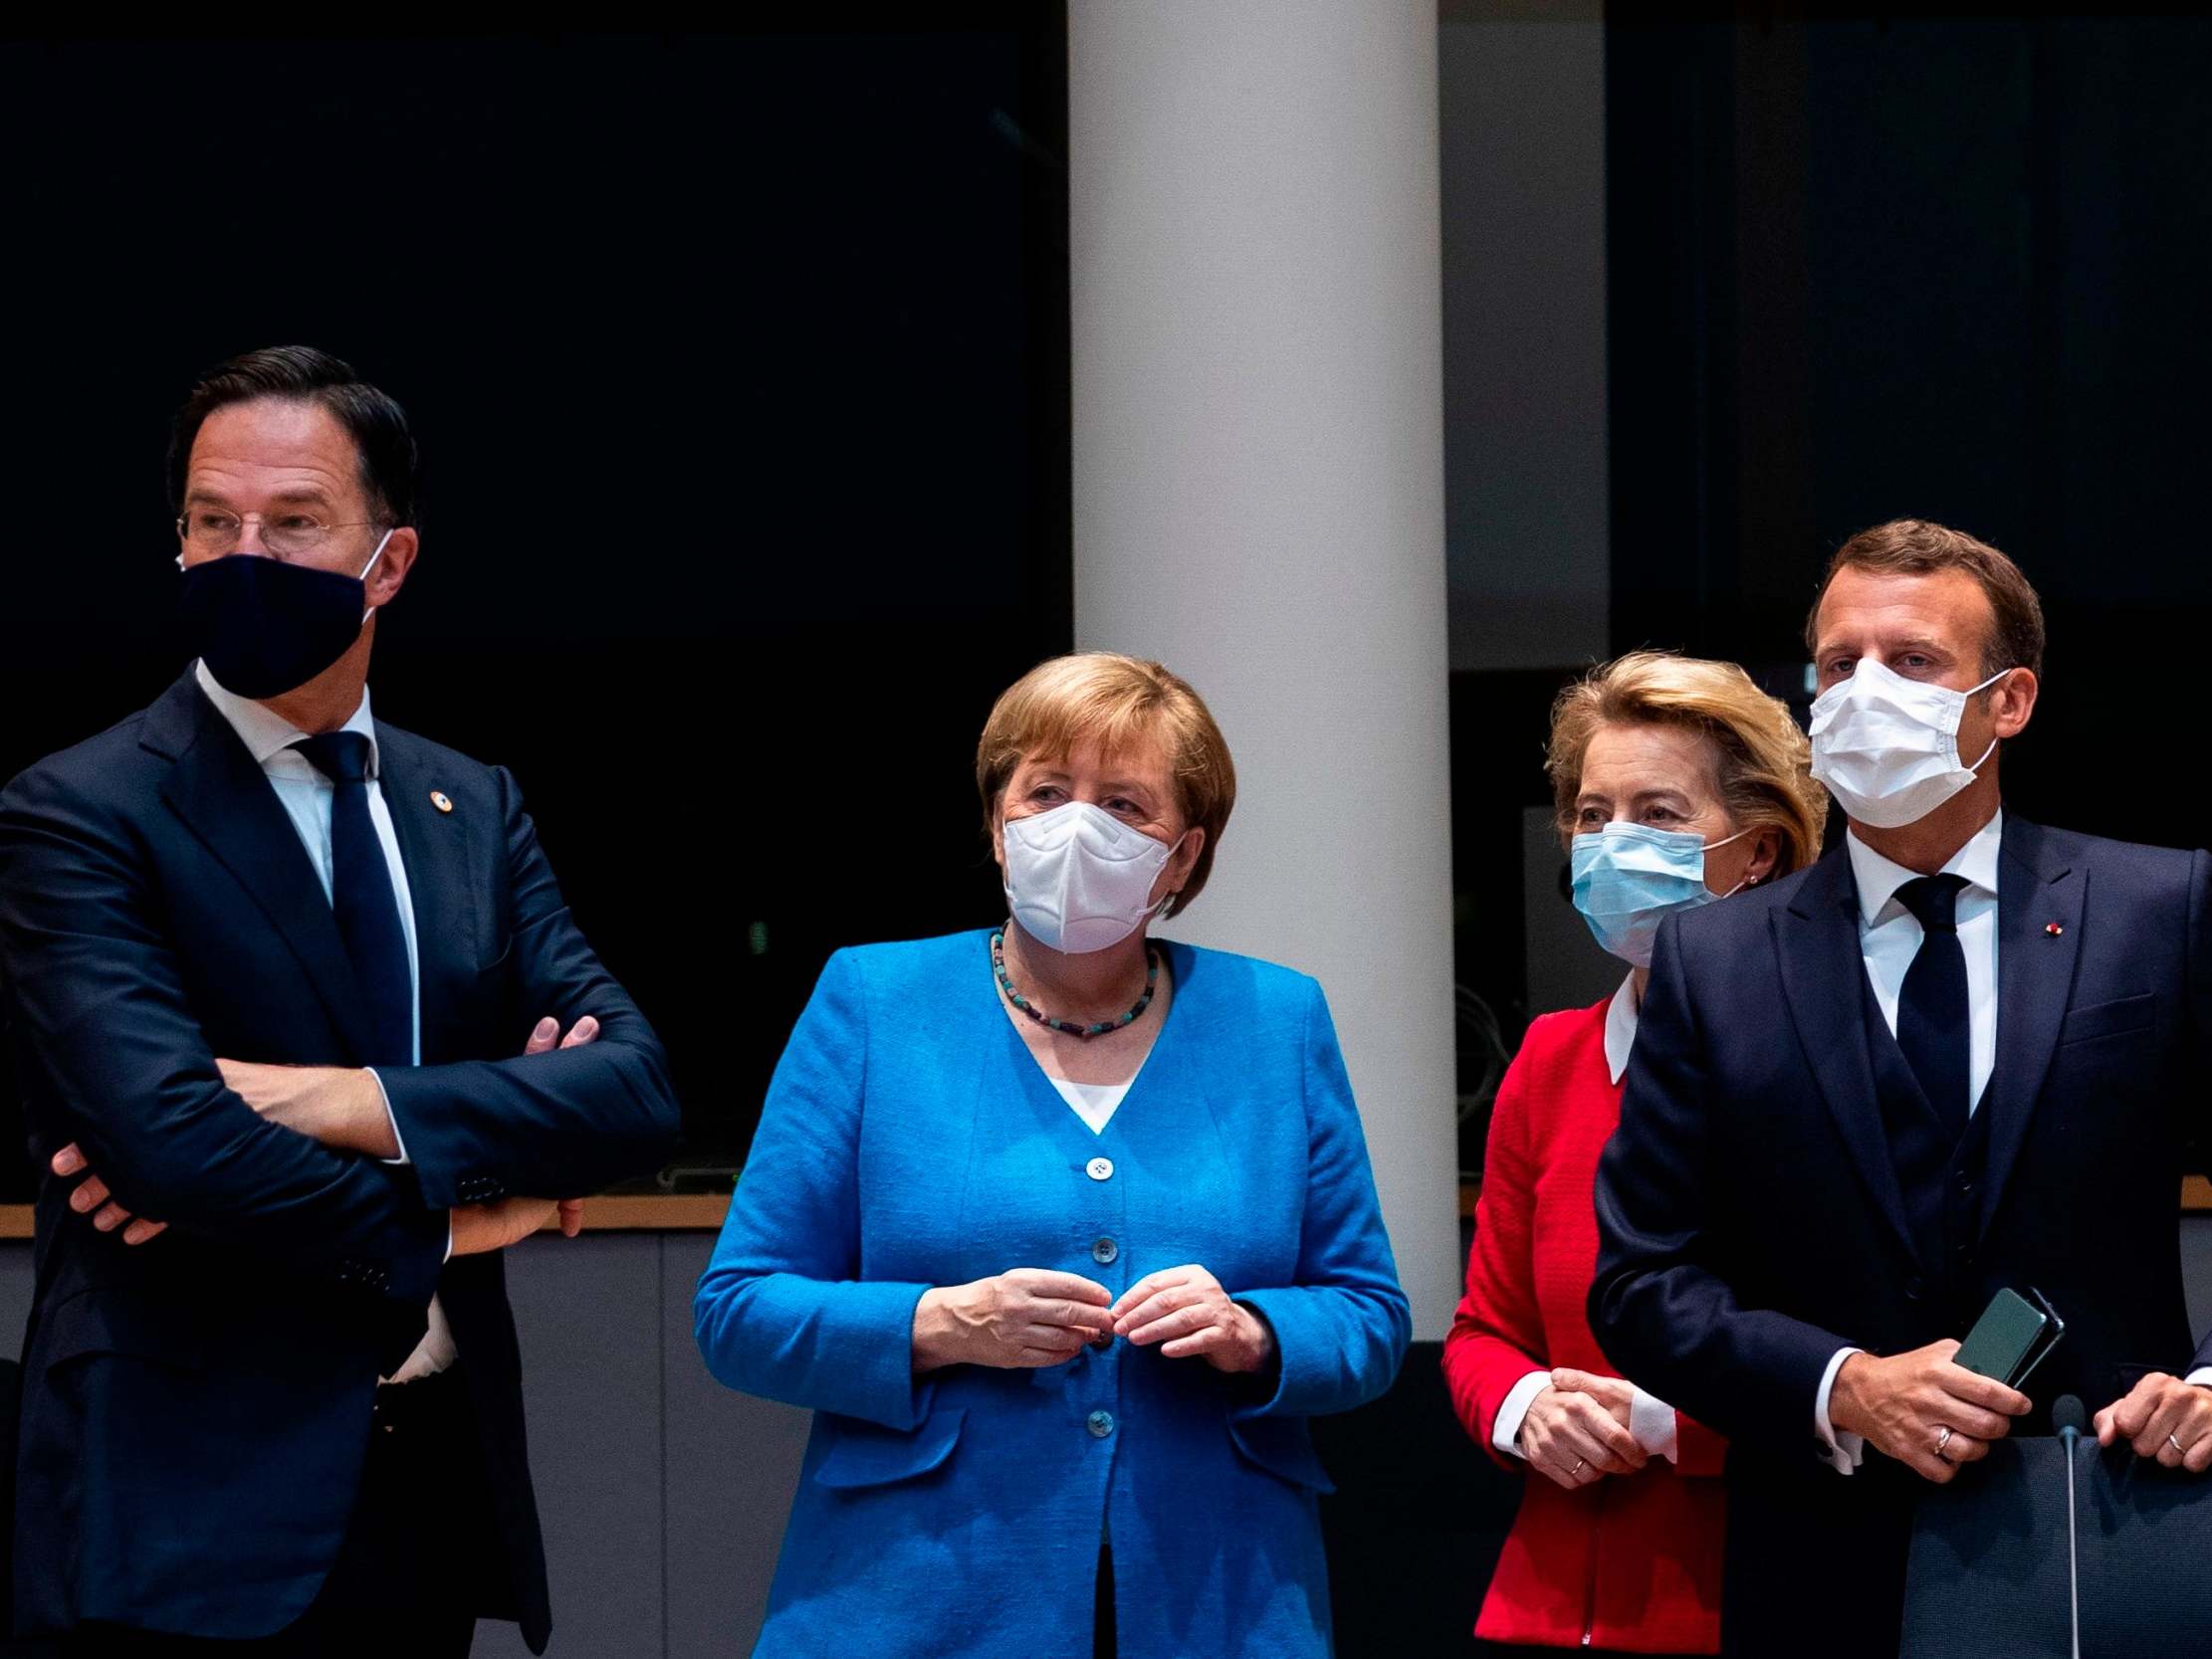 EU coronavirus recovery plan hanging in balance as Merkel warns of possibility of 'no solution' from third day of talks